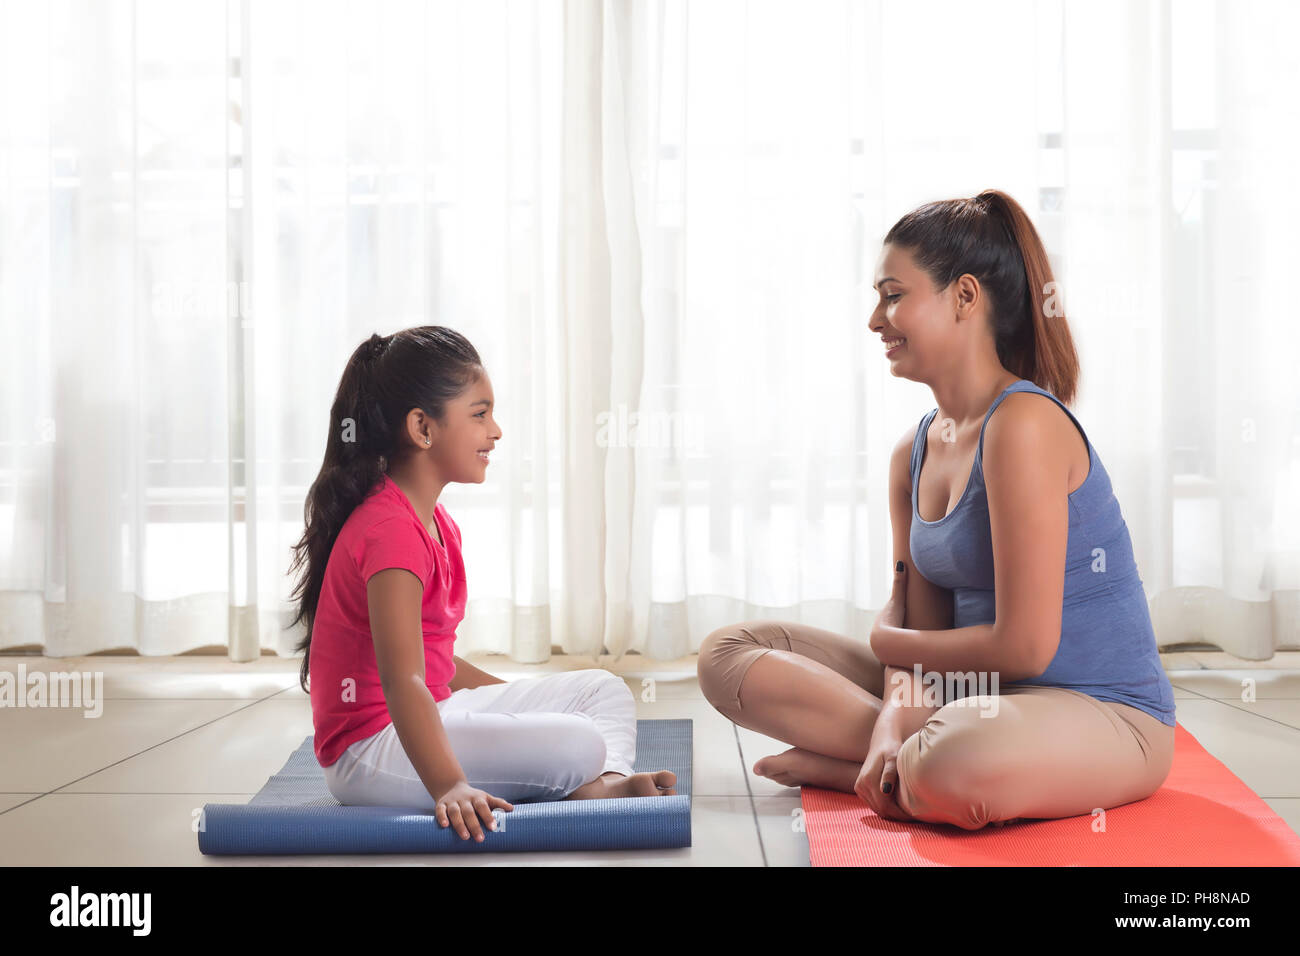 Mother and Daughter sitting on exercise mat Banque D'Images